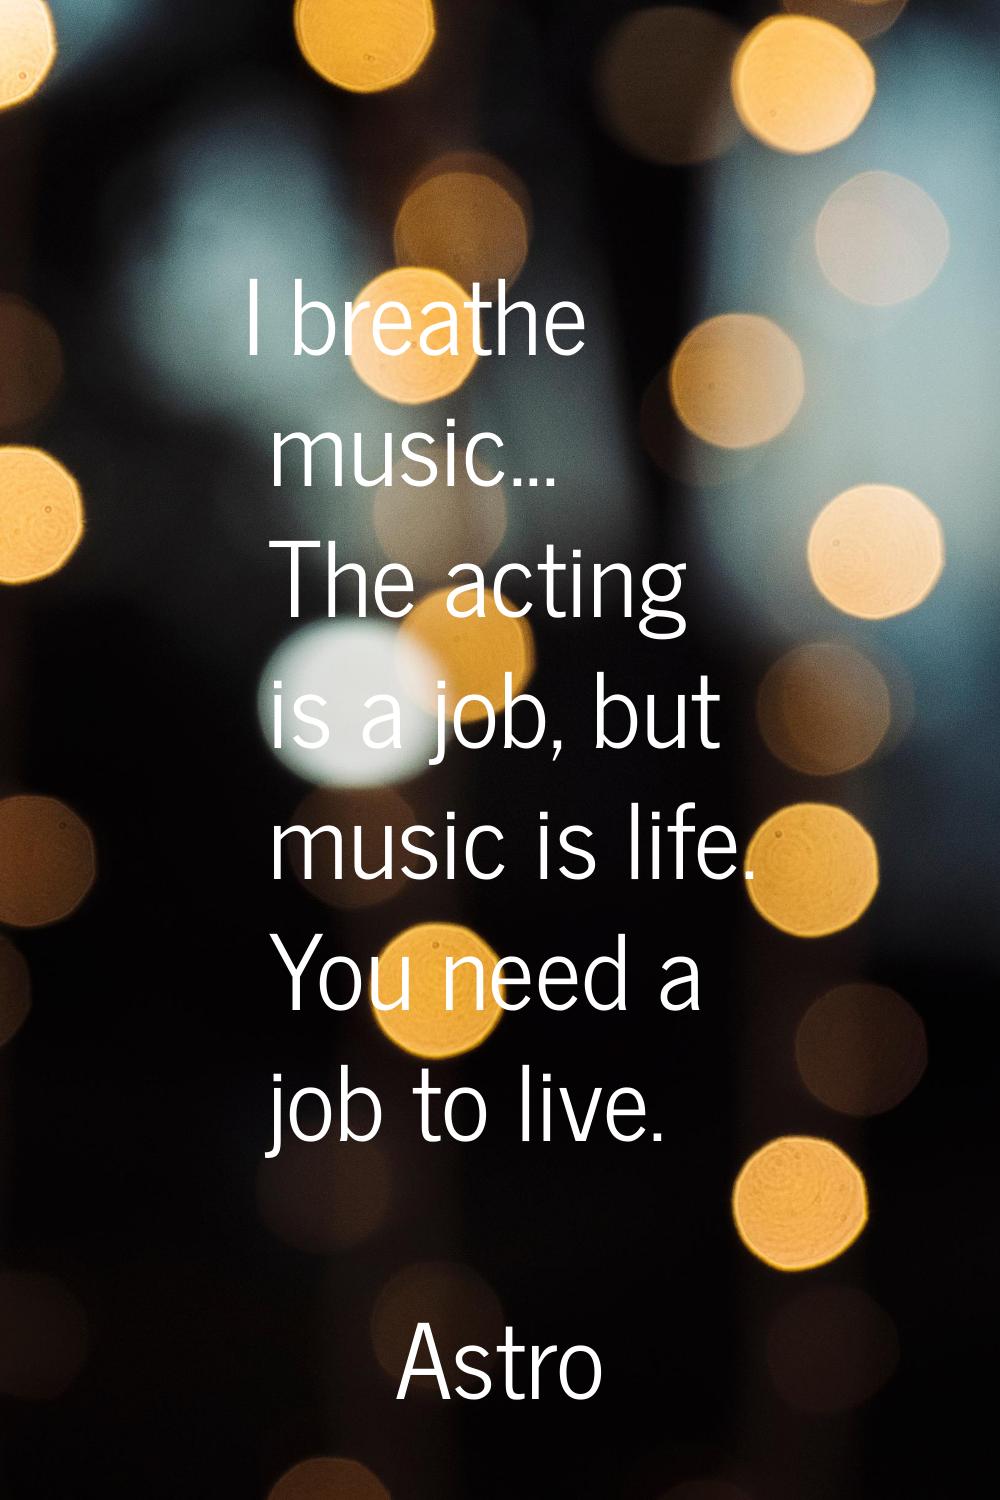 I breathe music... The acting is a job, but music is life. You need a job to live.